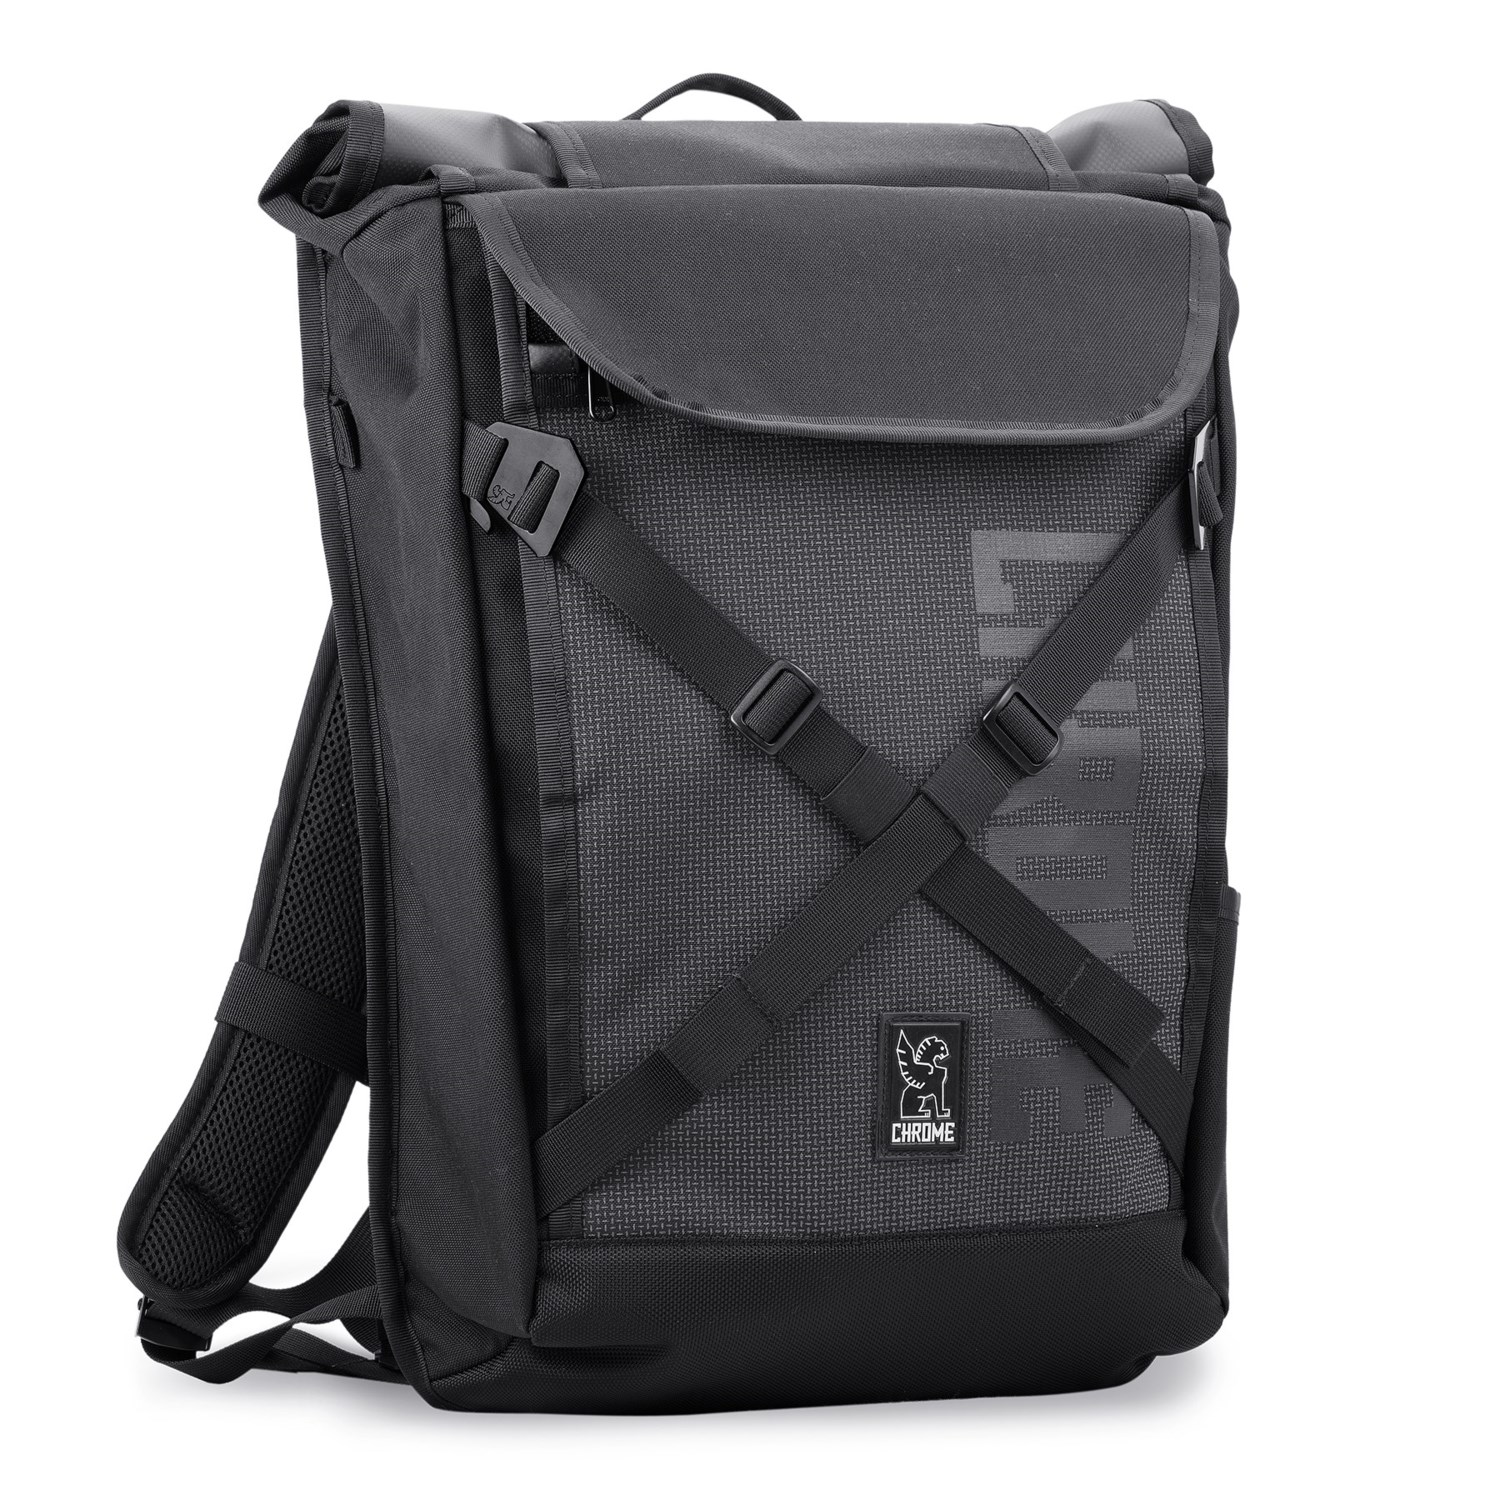 Chrome Industries Bravo Reflective Roll-Top Backpack 9817G - Save 44%